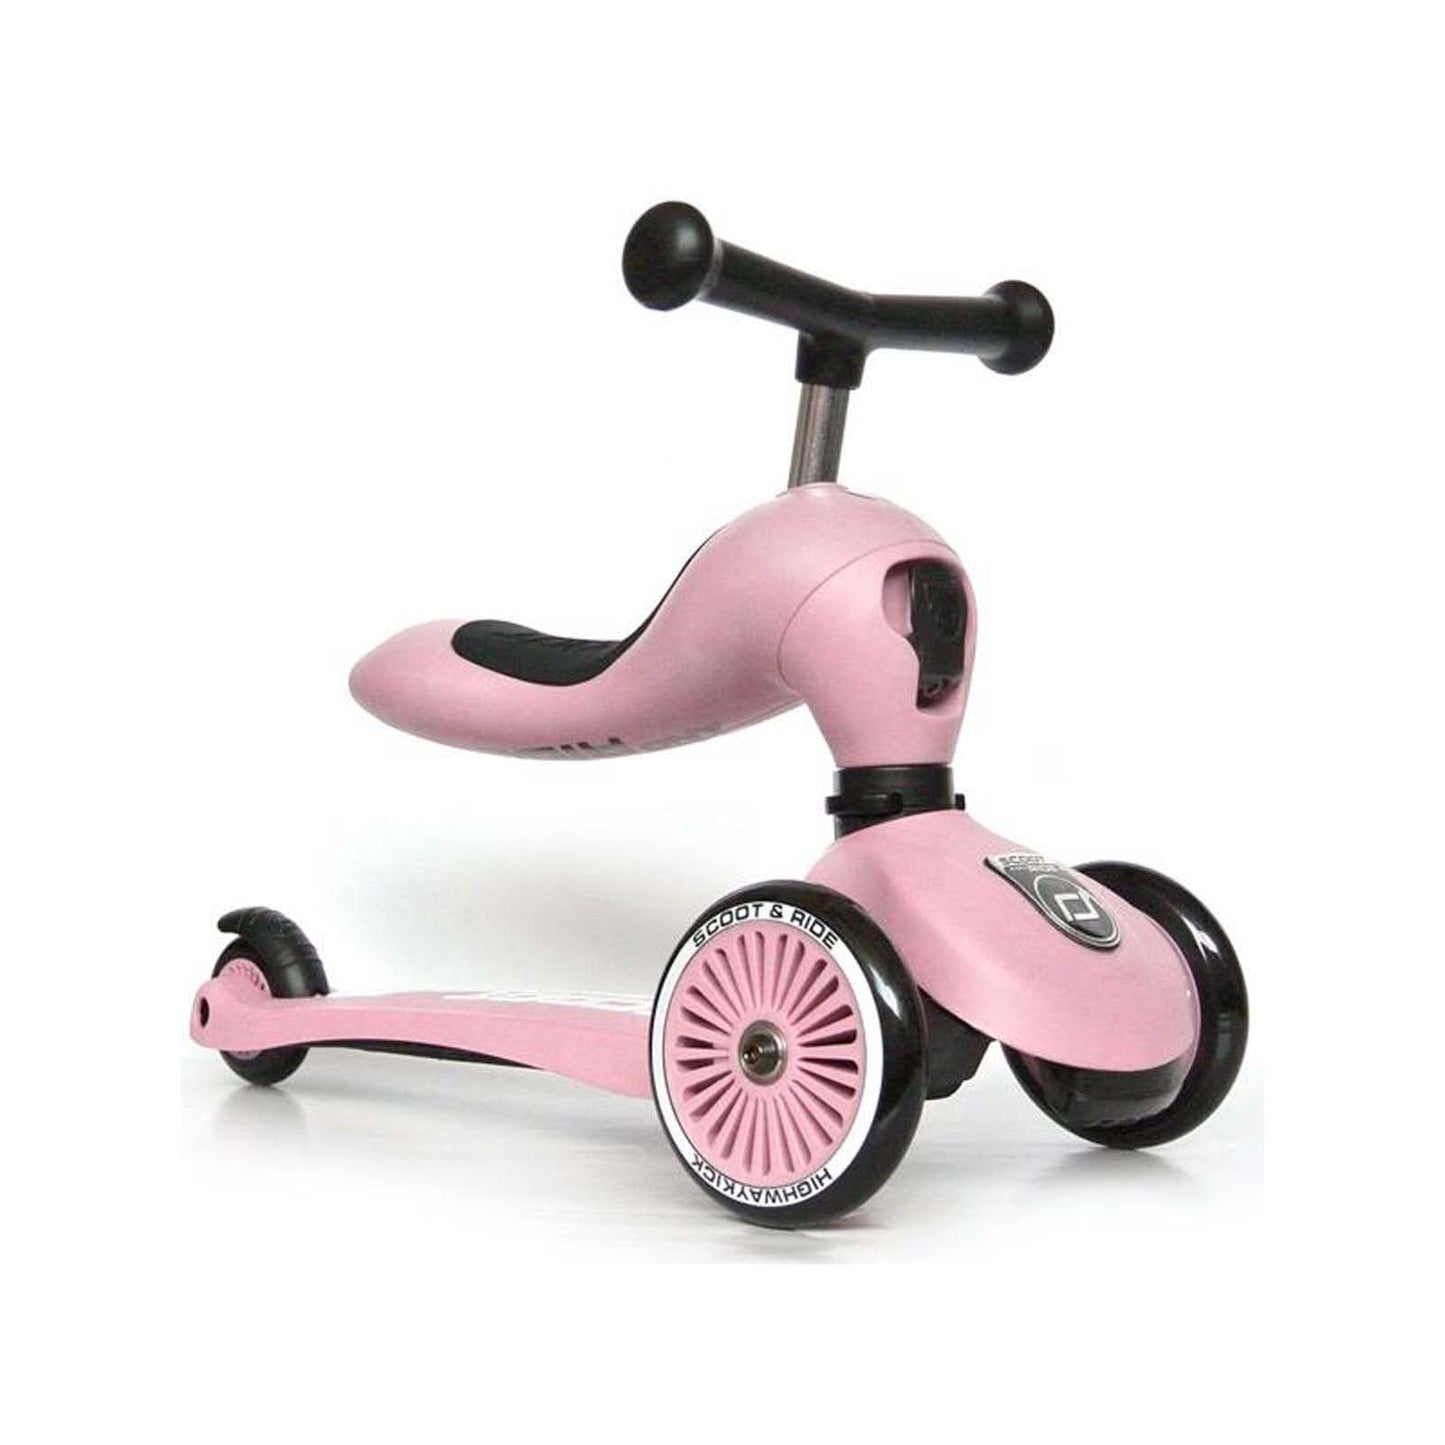 Scoot & Ride - Highwaykick1 Scooter For Toddler 1-5Y (Rose)